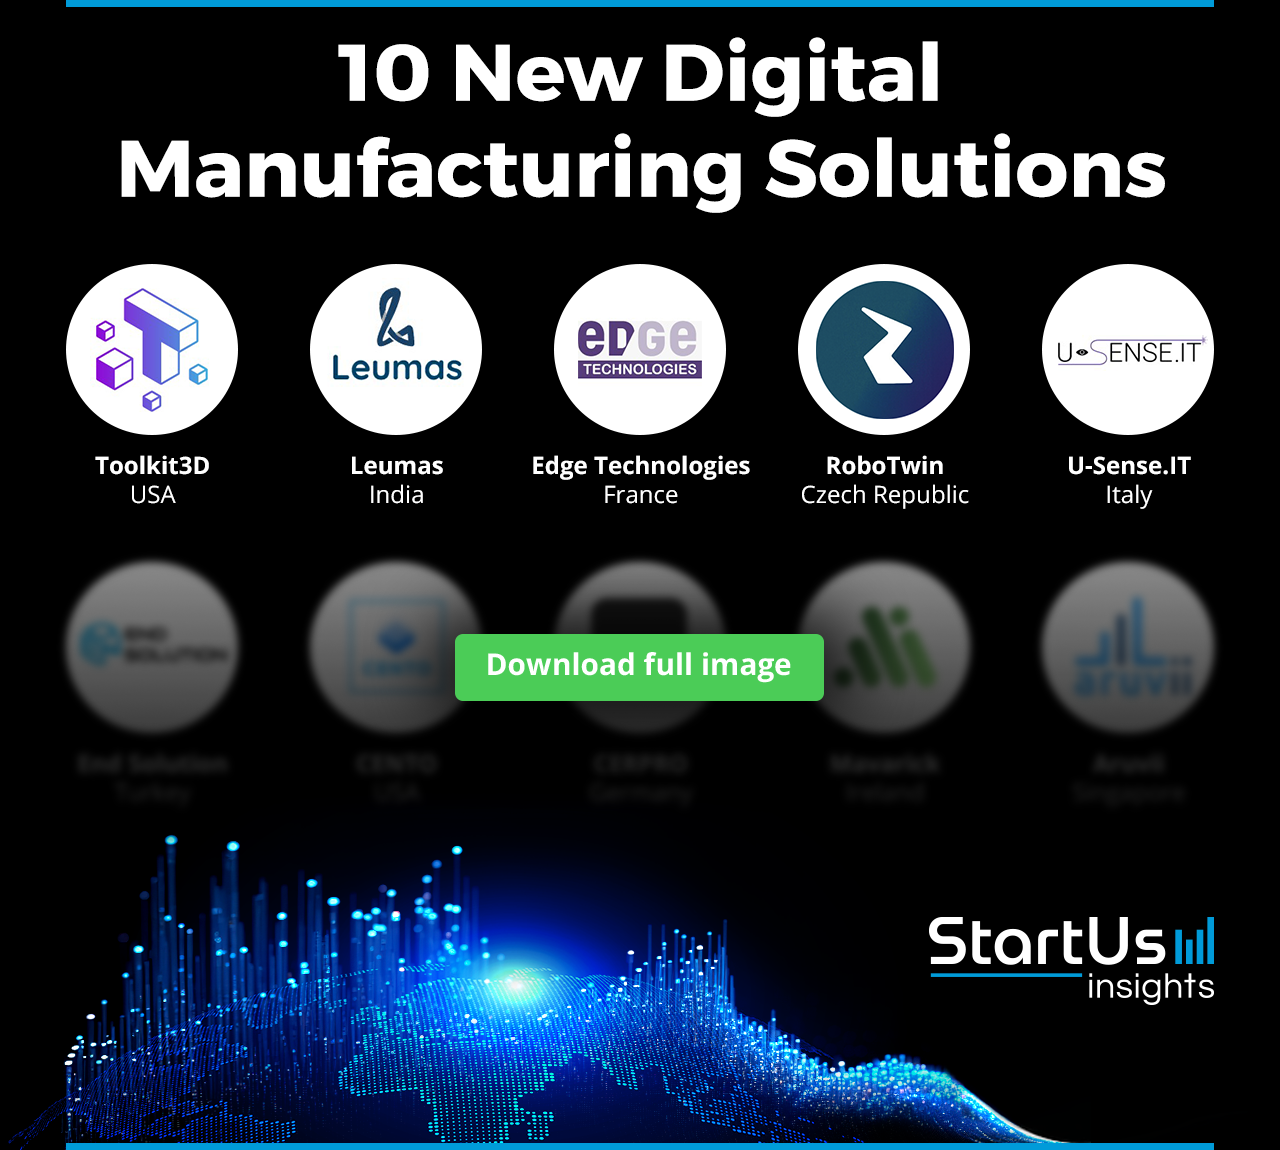 New-Digital-Manufacturing-Solutions-Logos-Blurred-StartUs-Insights-noresize